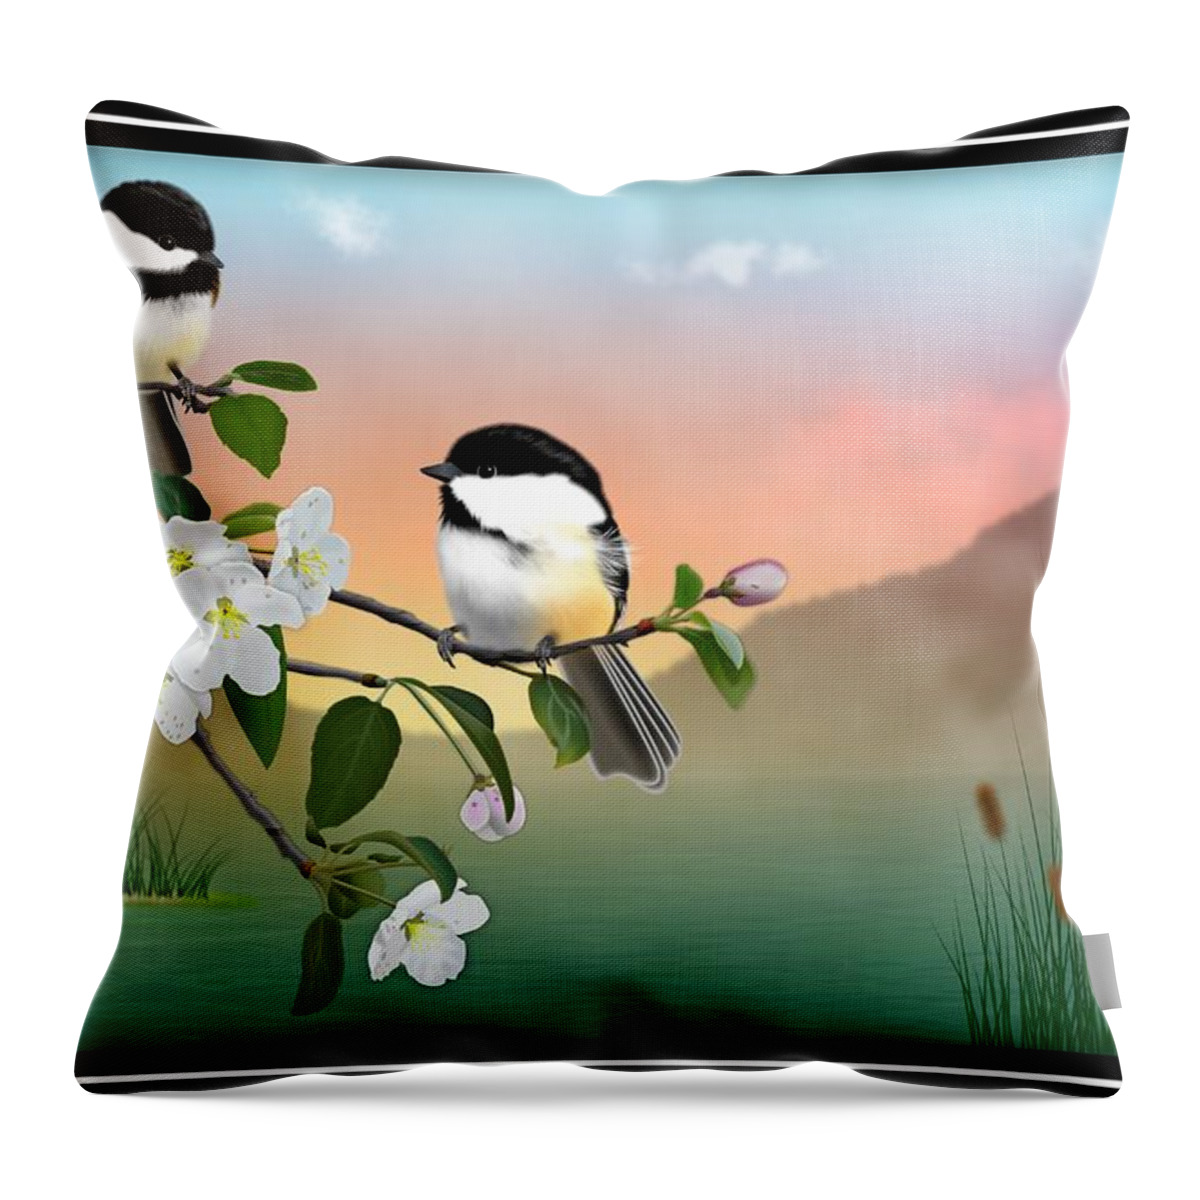 Black Capped Chickadees Throw Pillow featuring the digital art Chickadee Lake by John Wills